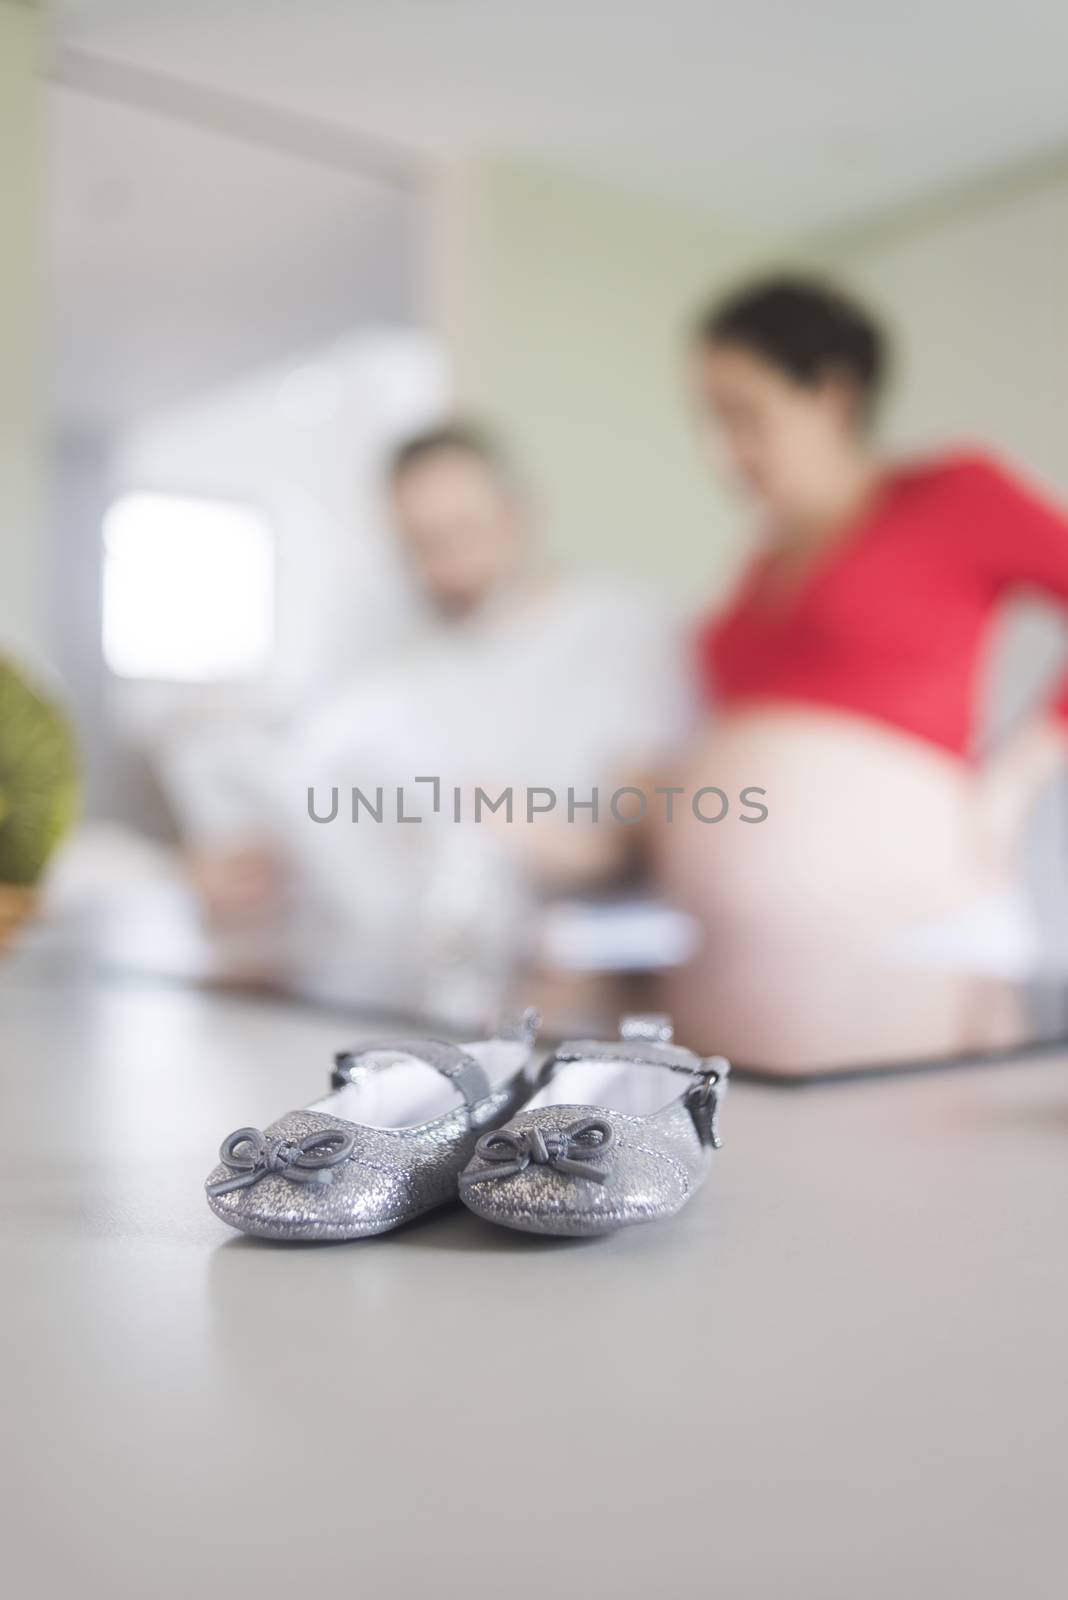 Baby shoes on a kitchen table while expecting couple standing unfocussed in the background